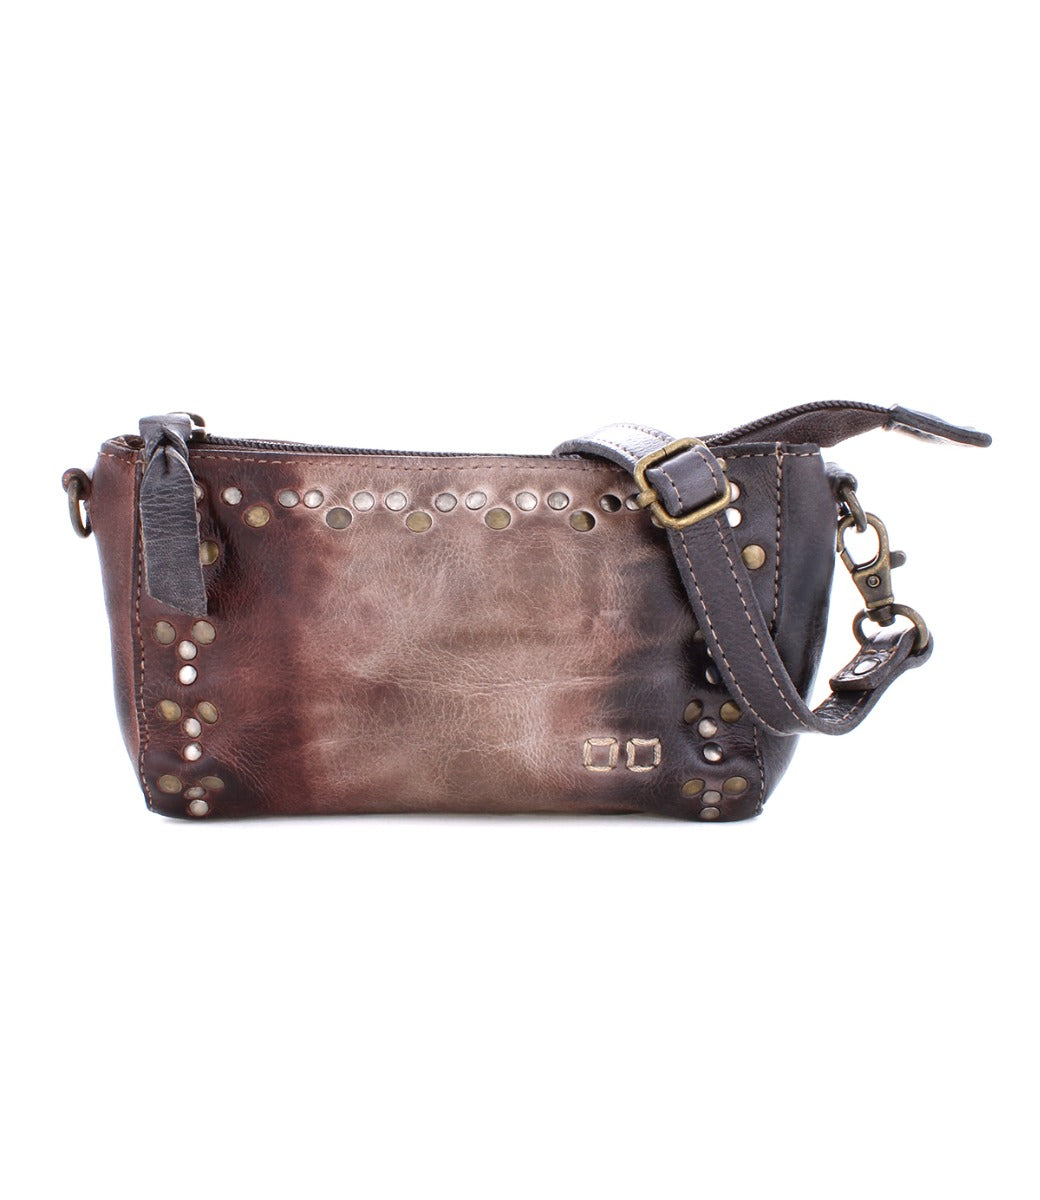 An Encase brown leather cross body bag with studded details from Bed Stu.